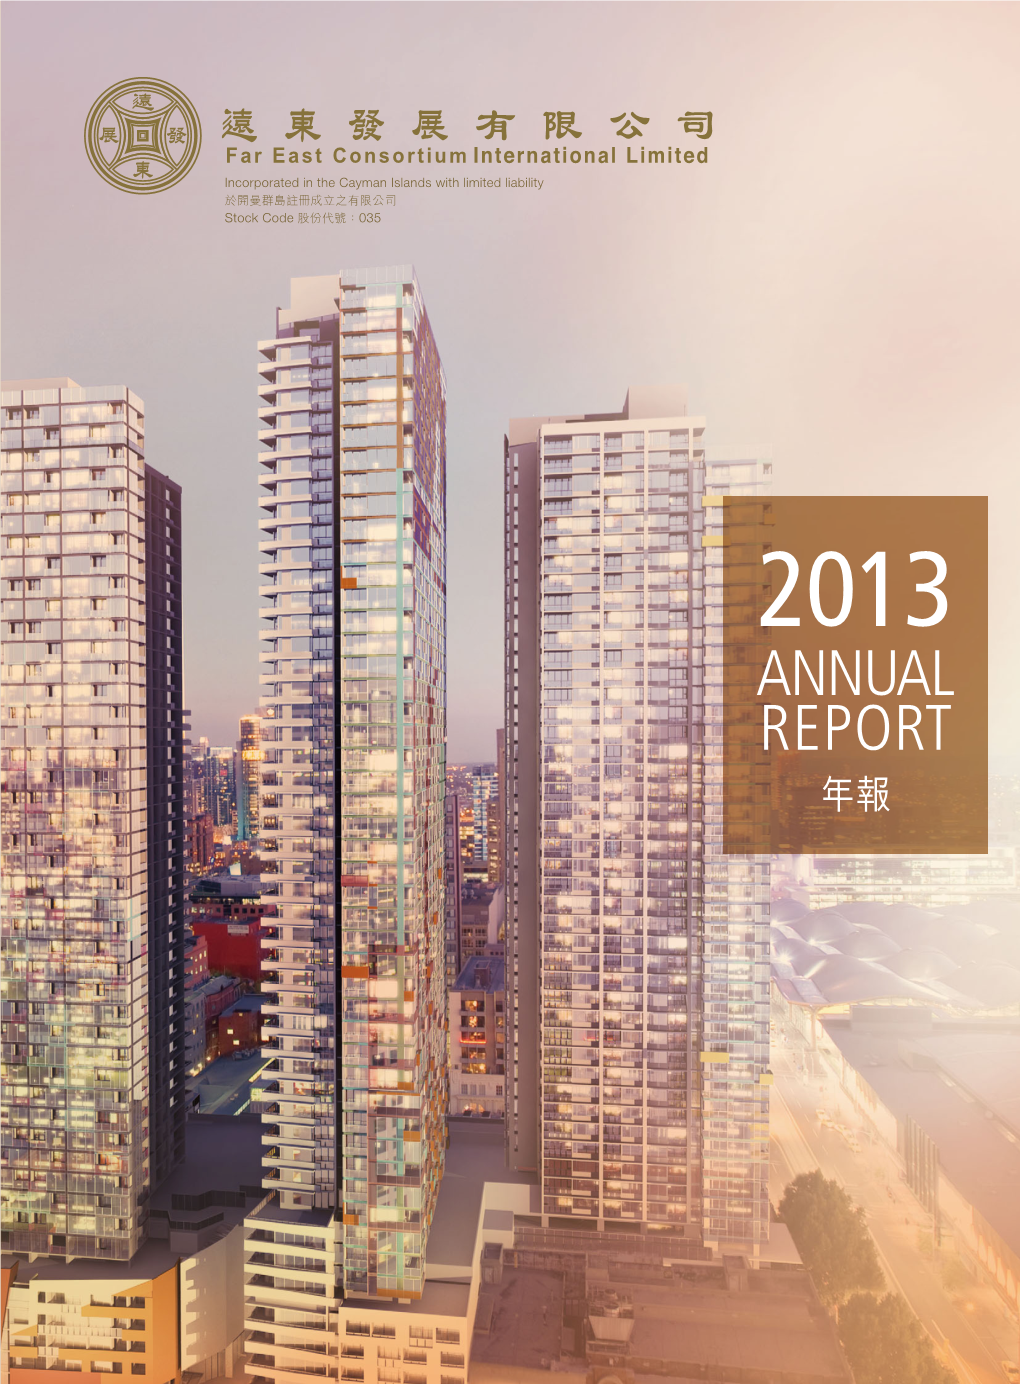 ANNUAL REPORT 年報 Annual Report 2013